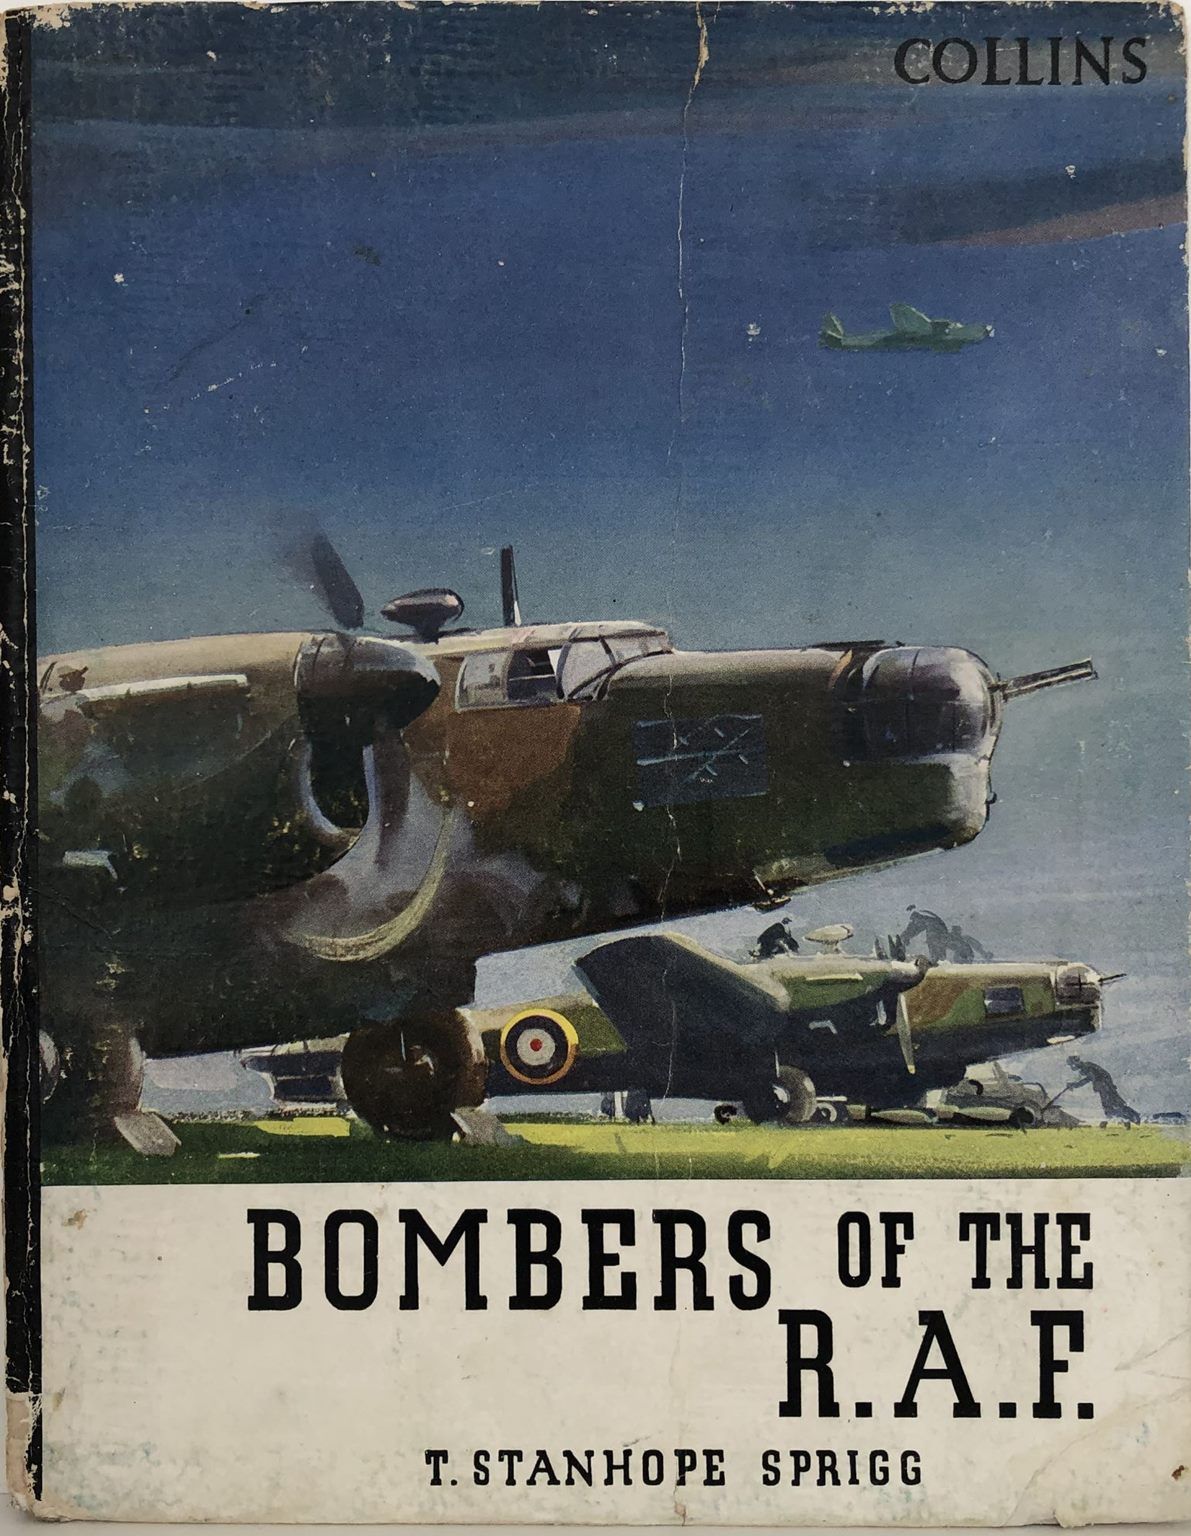 BOMBERS OF THE R.A.F. by T. Standhope Sprigg